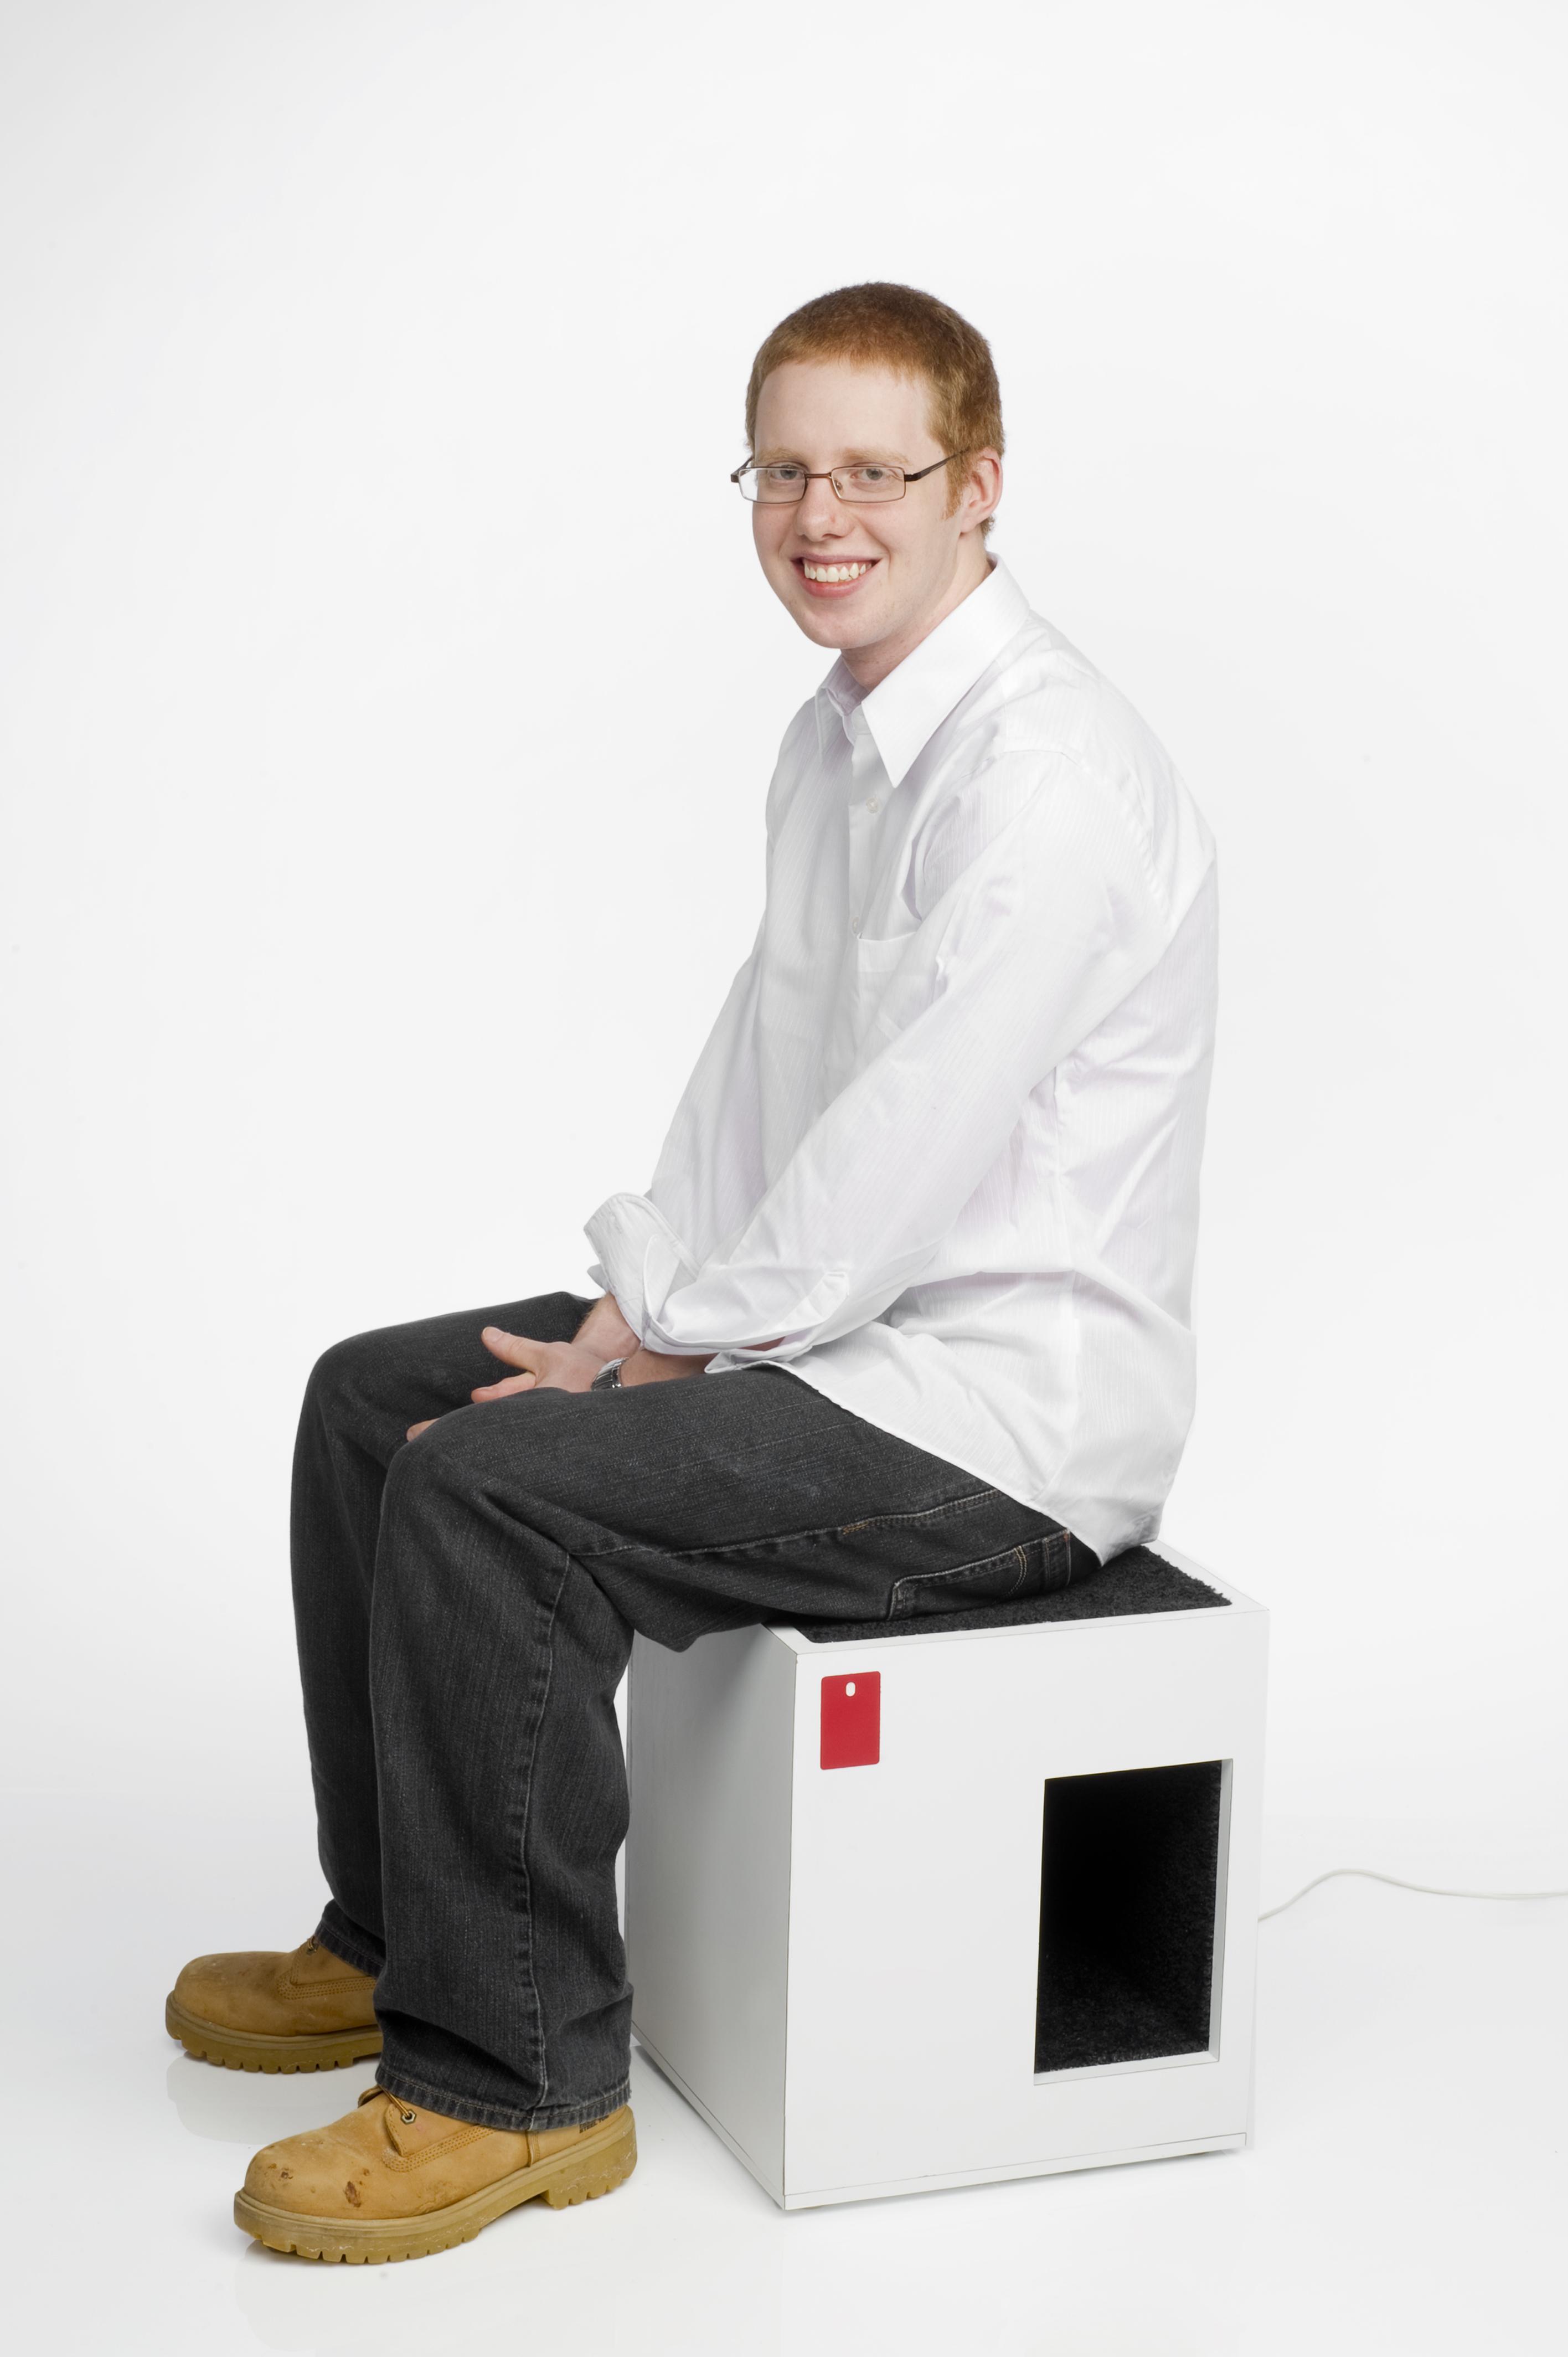 A person sits on a seat-litter box combo design